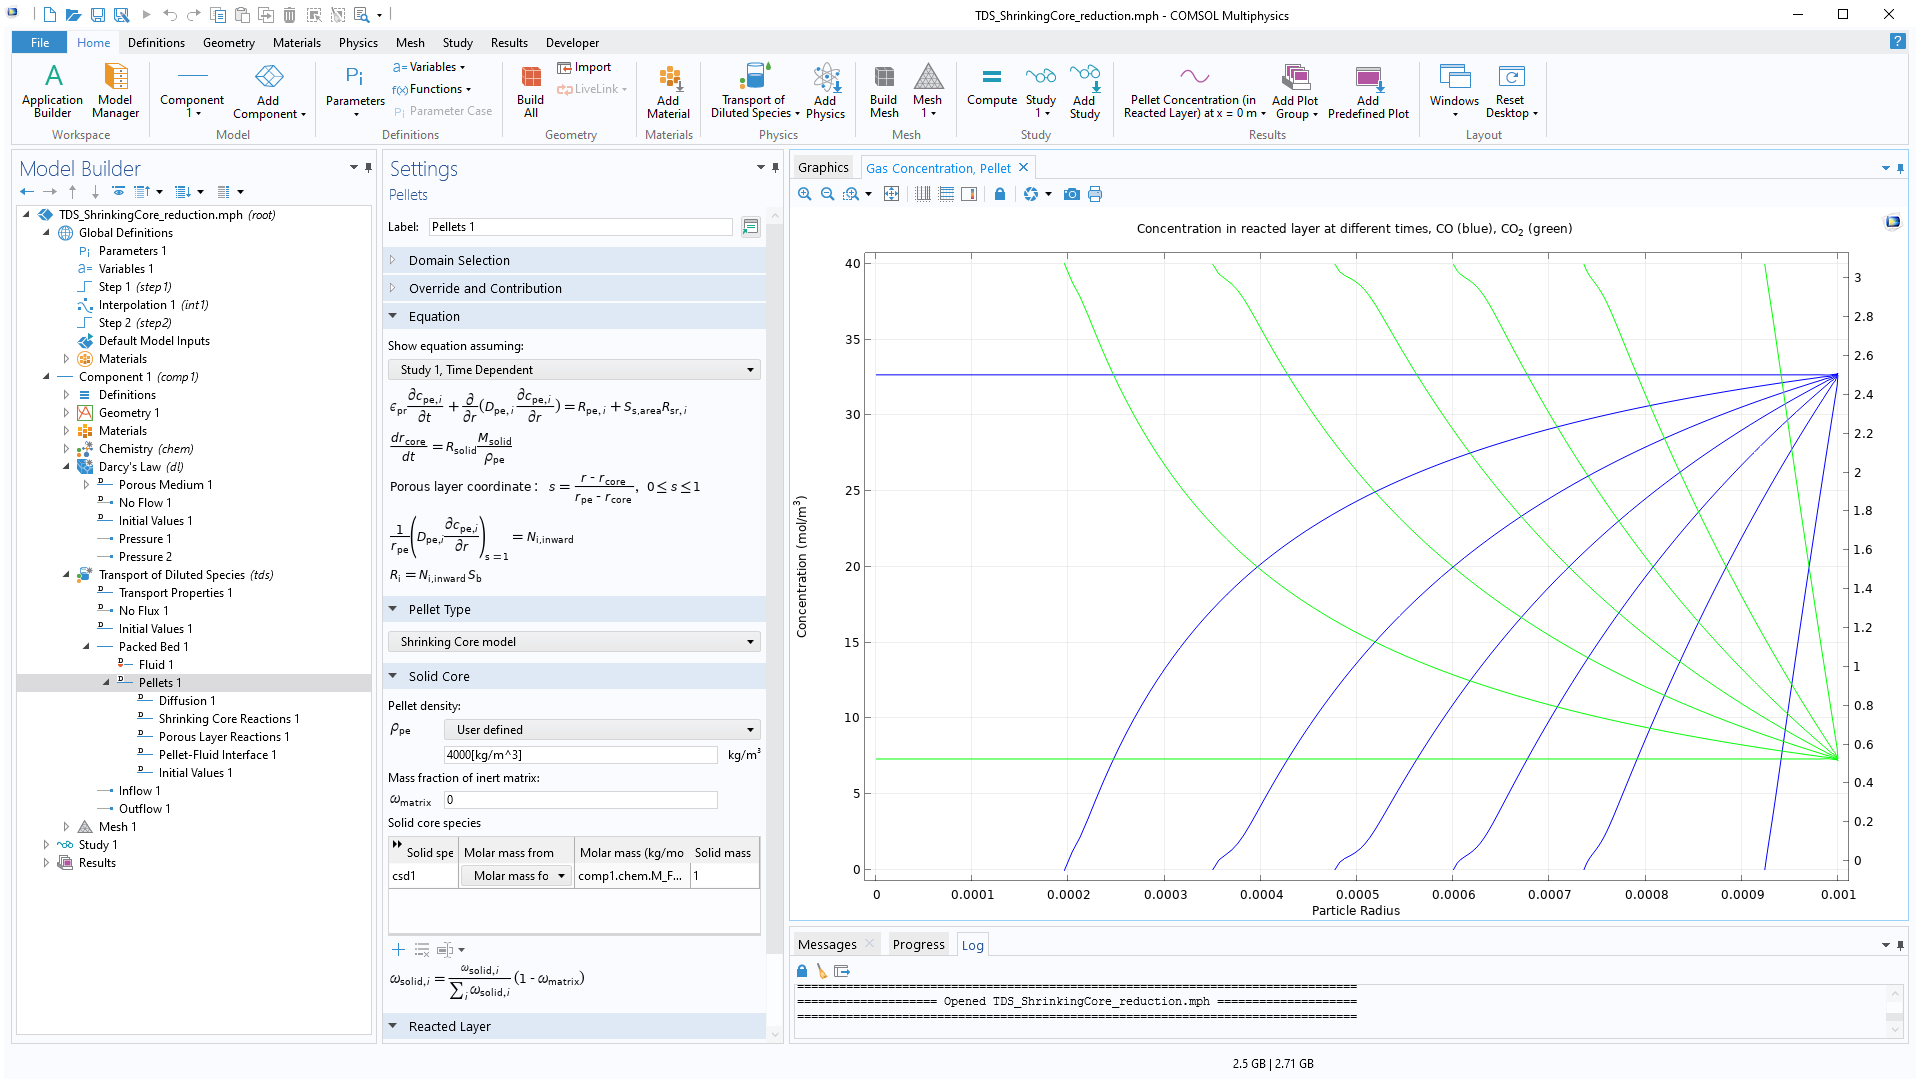 The COMSOL Multiphysics UI showing the Model Builder with the Pellet node selected, the corresponding Settings window, and the Gas Concentration, Pellet window open, showing a graph with blue and green lines to represent CO and CO2, respectively.